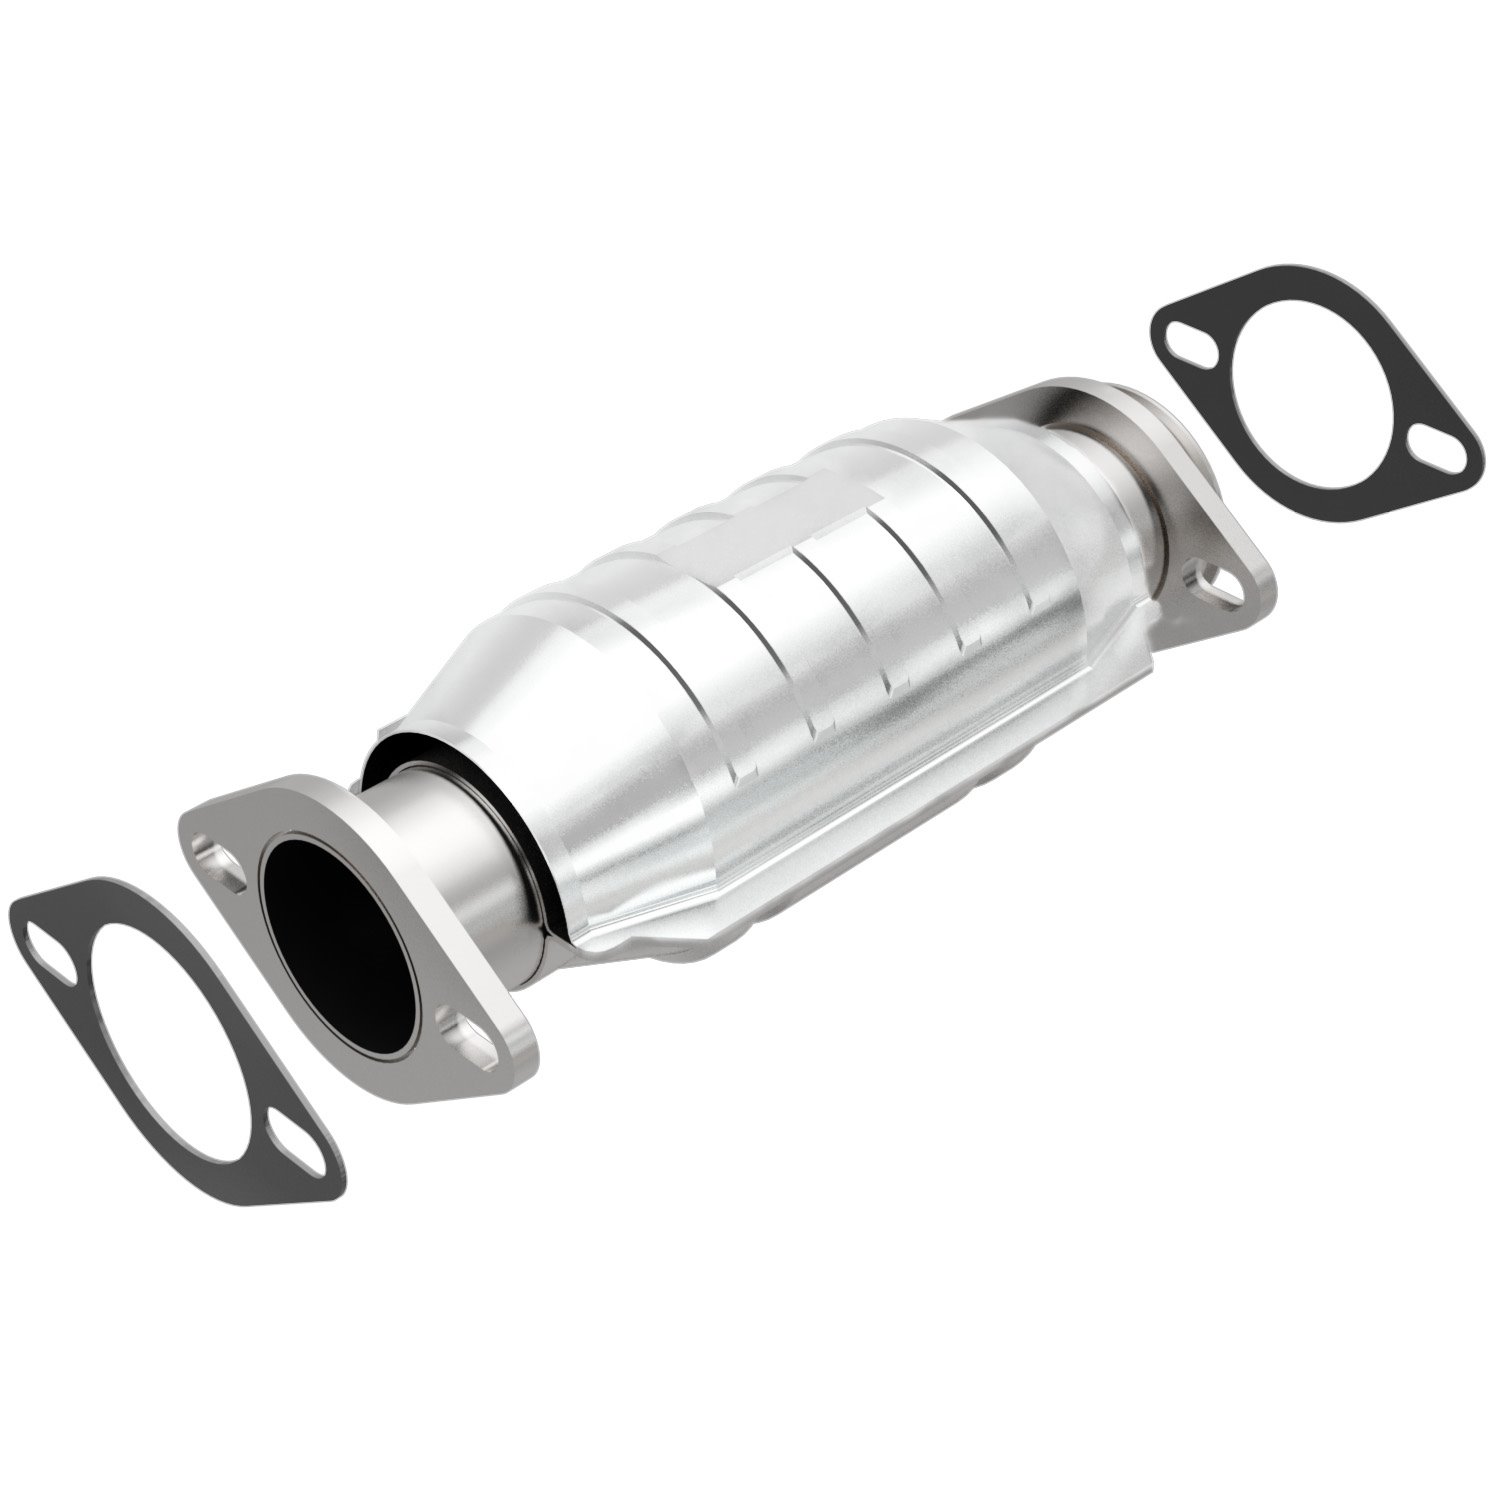 Direct-Fit Catalytic Converter 1989-94 for Nissan/Toyota